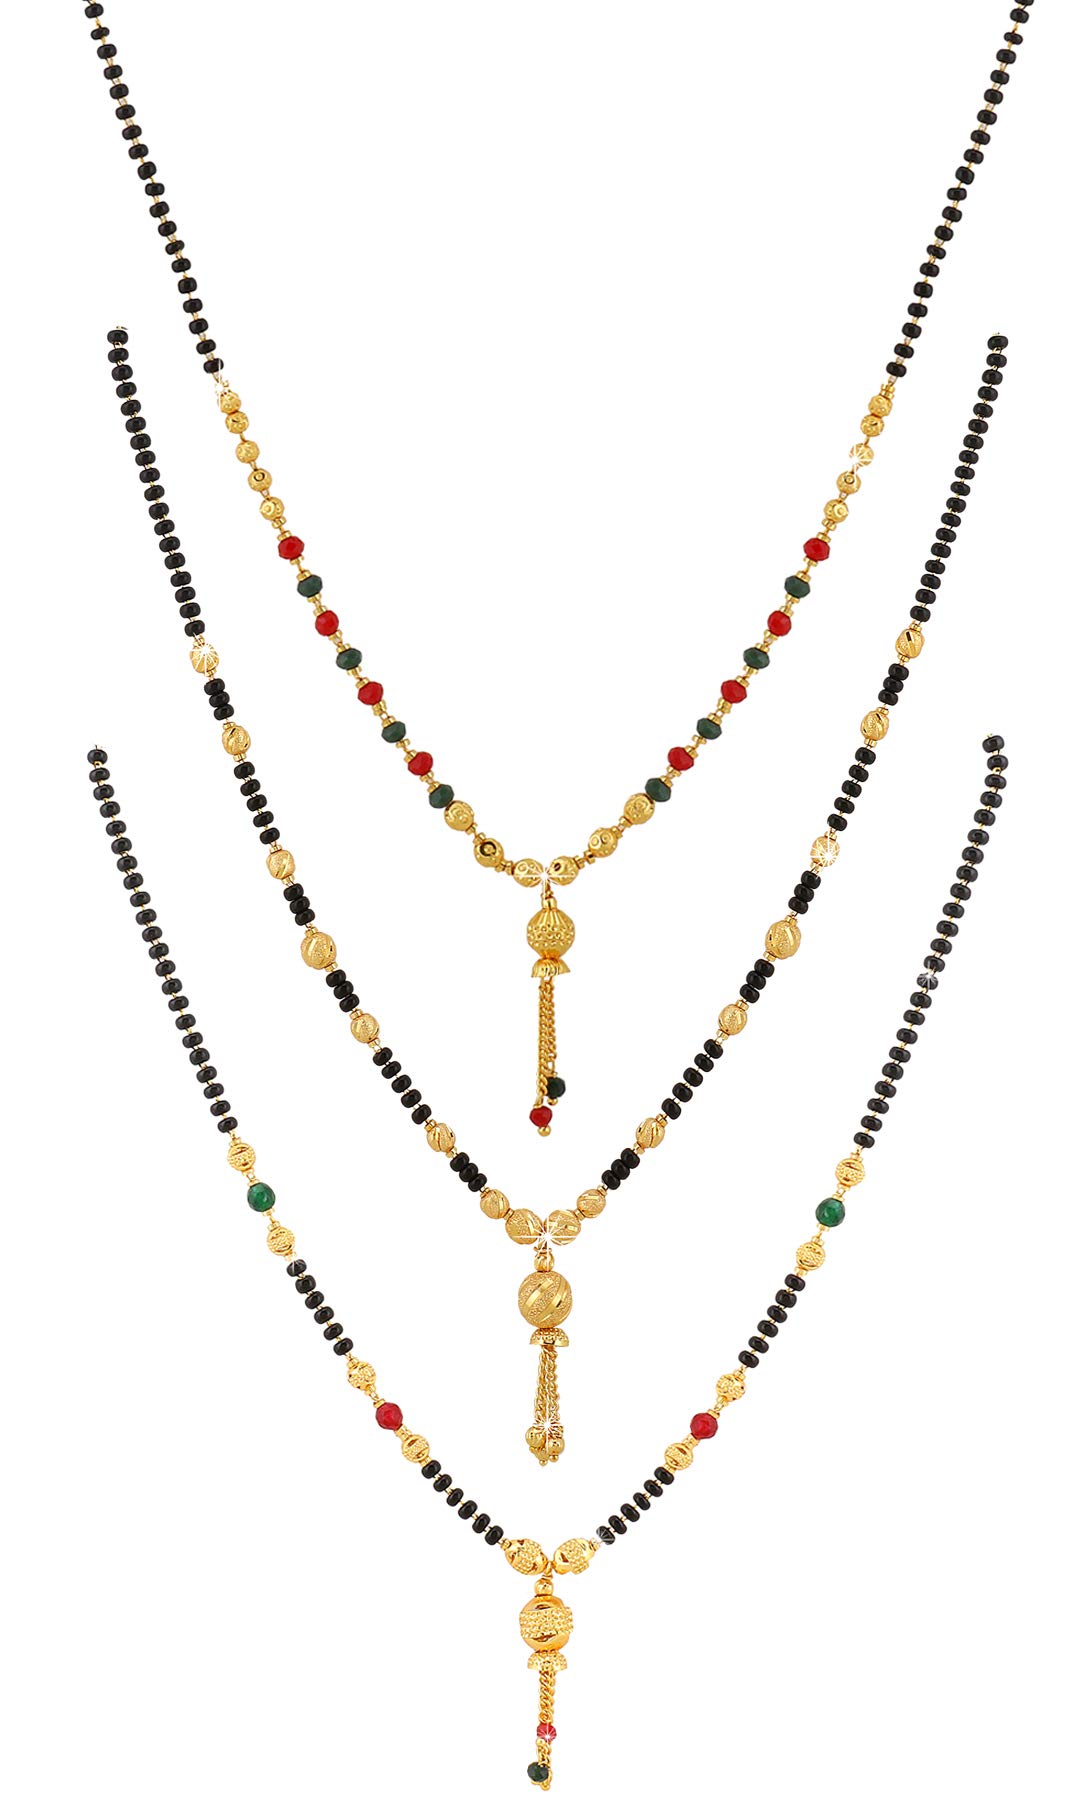 Yellow Chimes Combo of 3 PCs Ethnic Traditional Gold Plated Black Beads Mangalsutra Pendant Necklace for Women and Girls